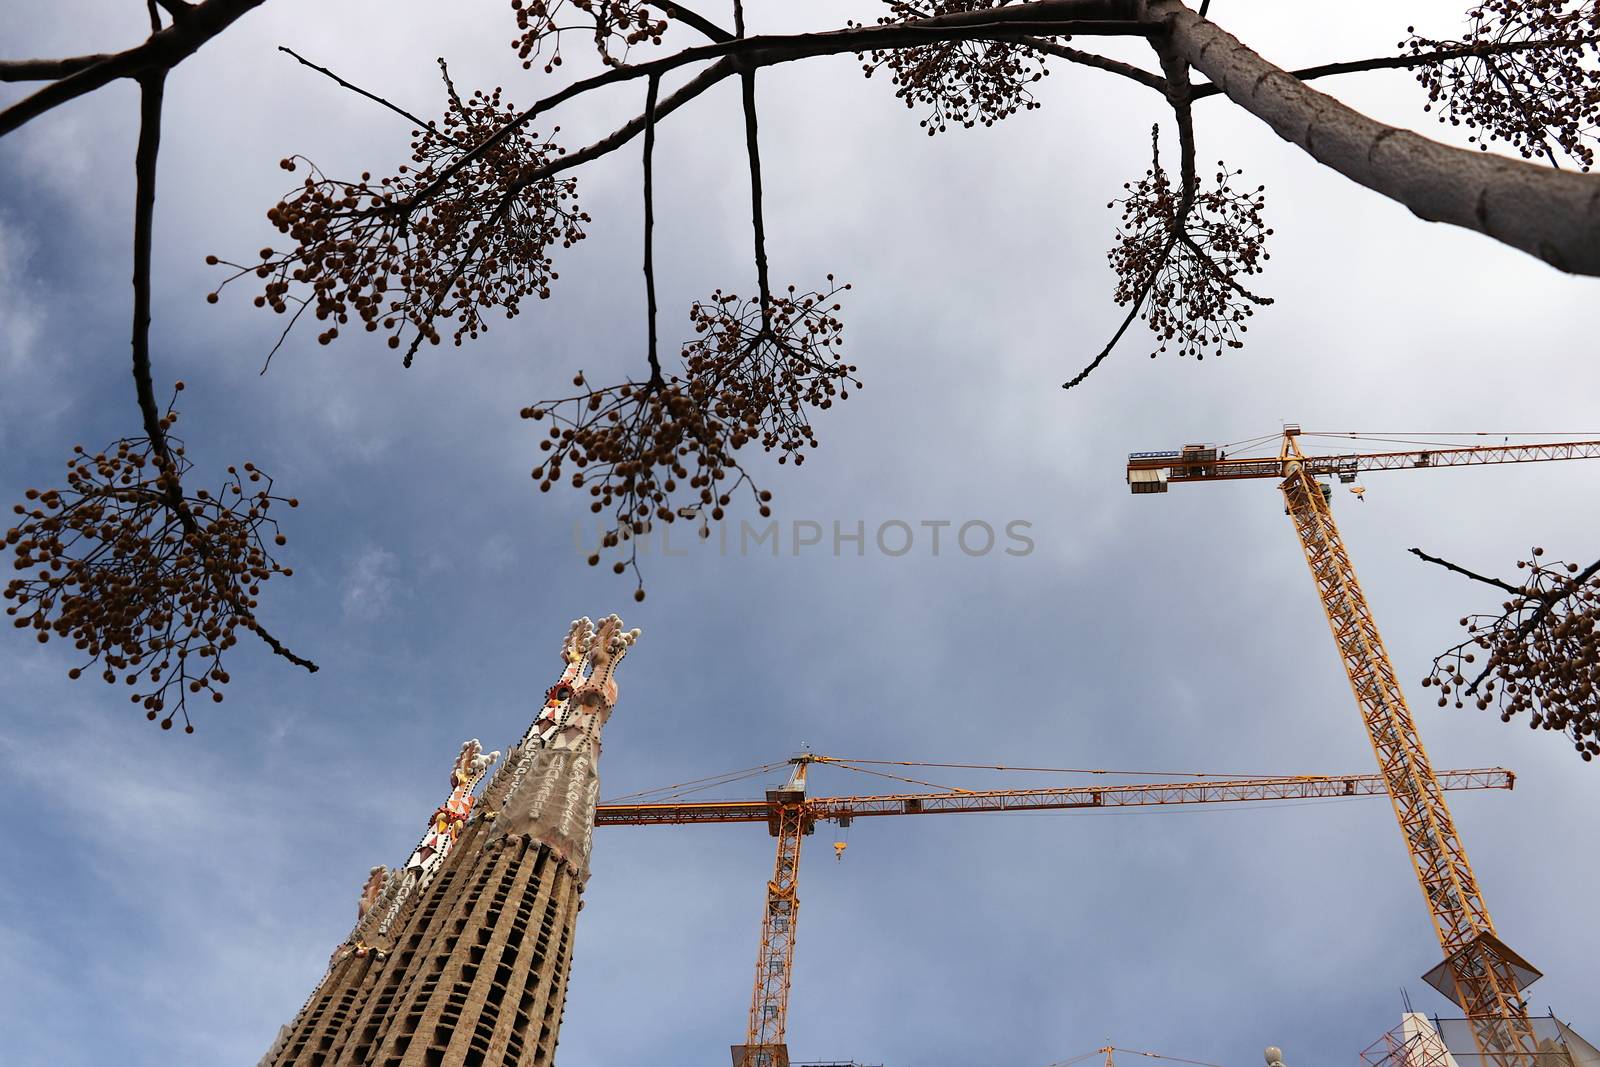 The façade merges with the flowers of a tree and the construction site cranes